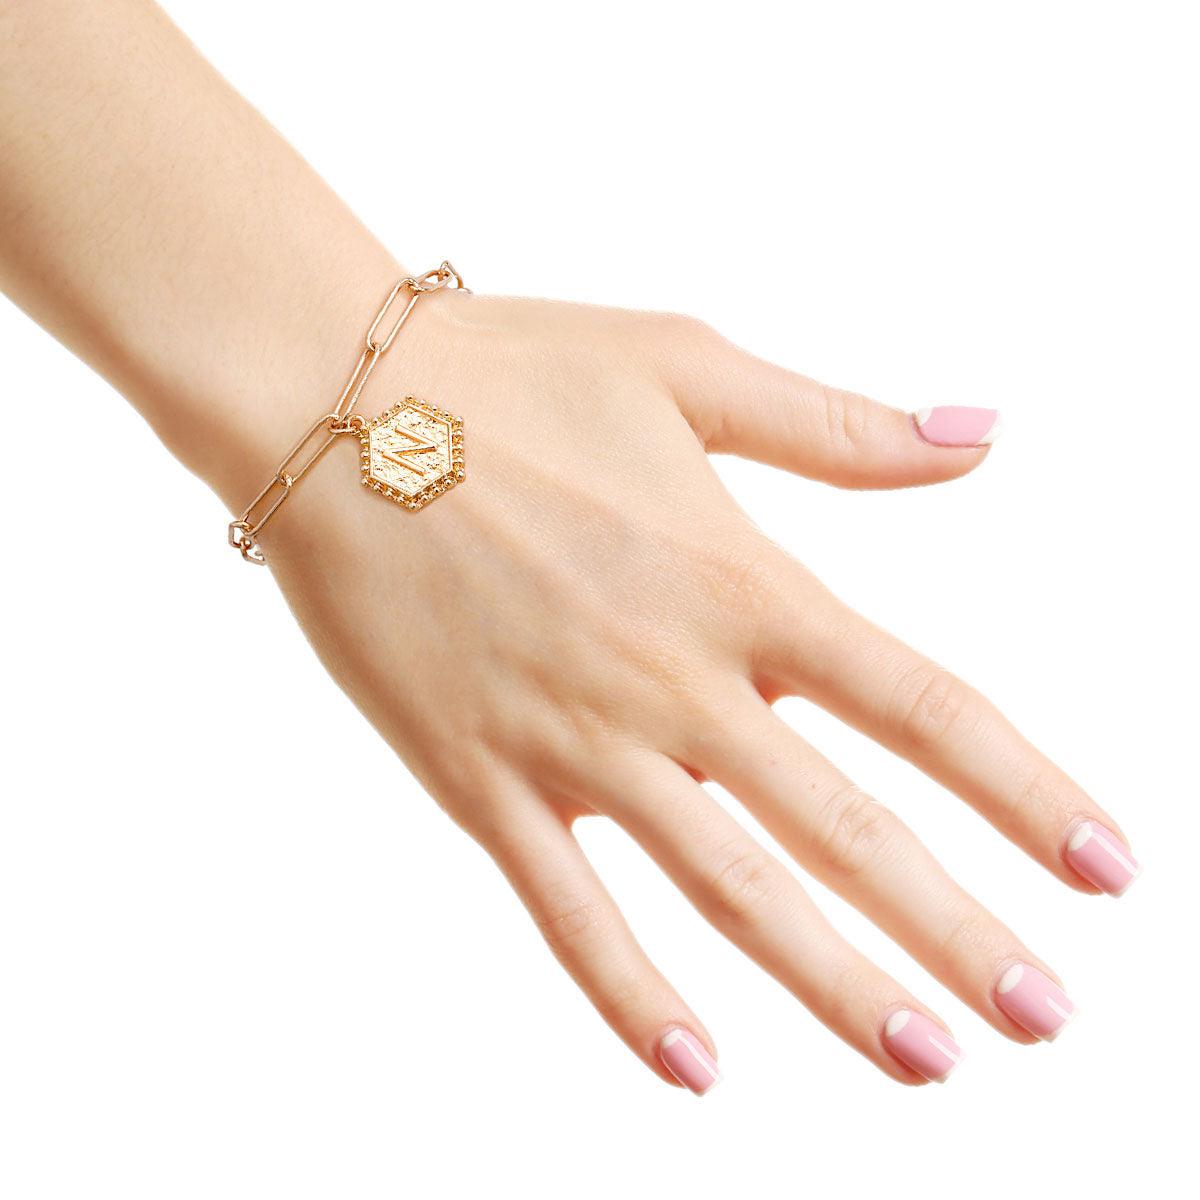 Chic Women's Gold Bracelet with Initial N Charm - Personalized Gift Idea